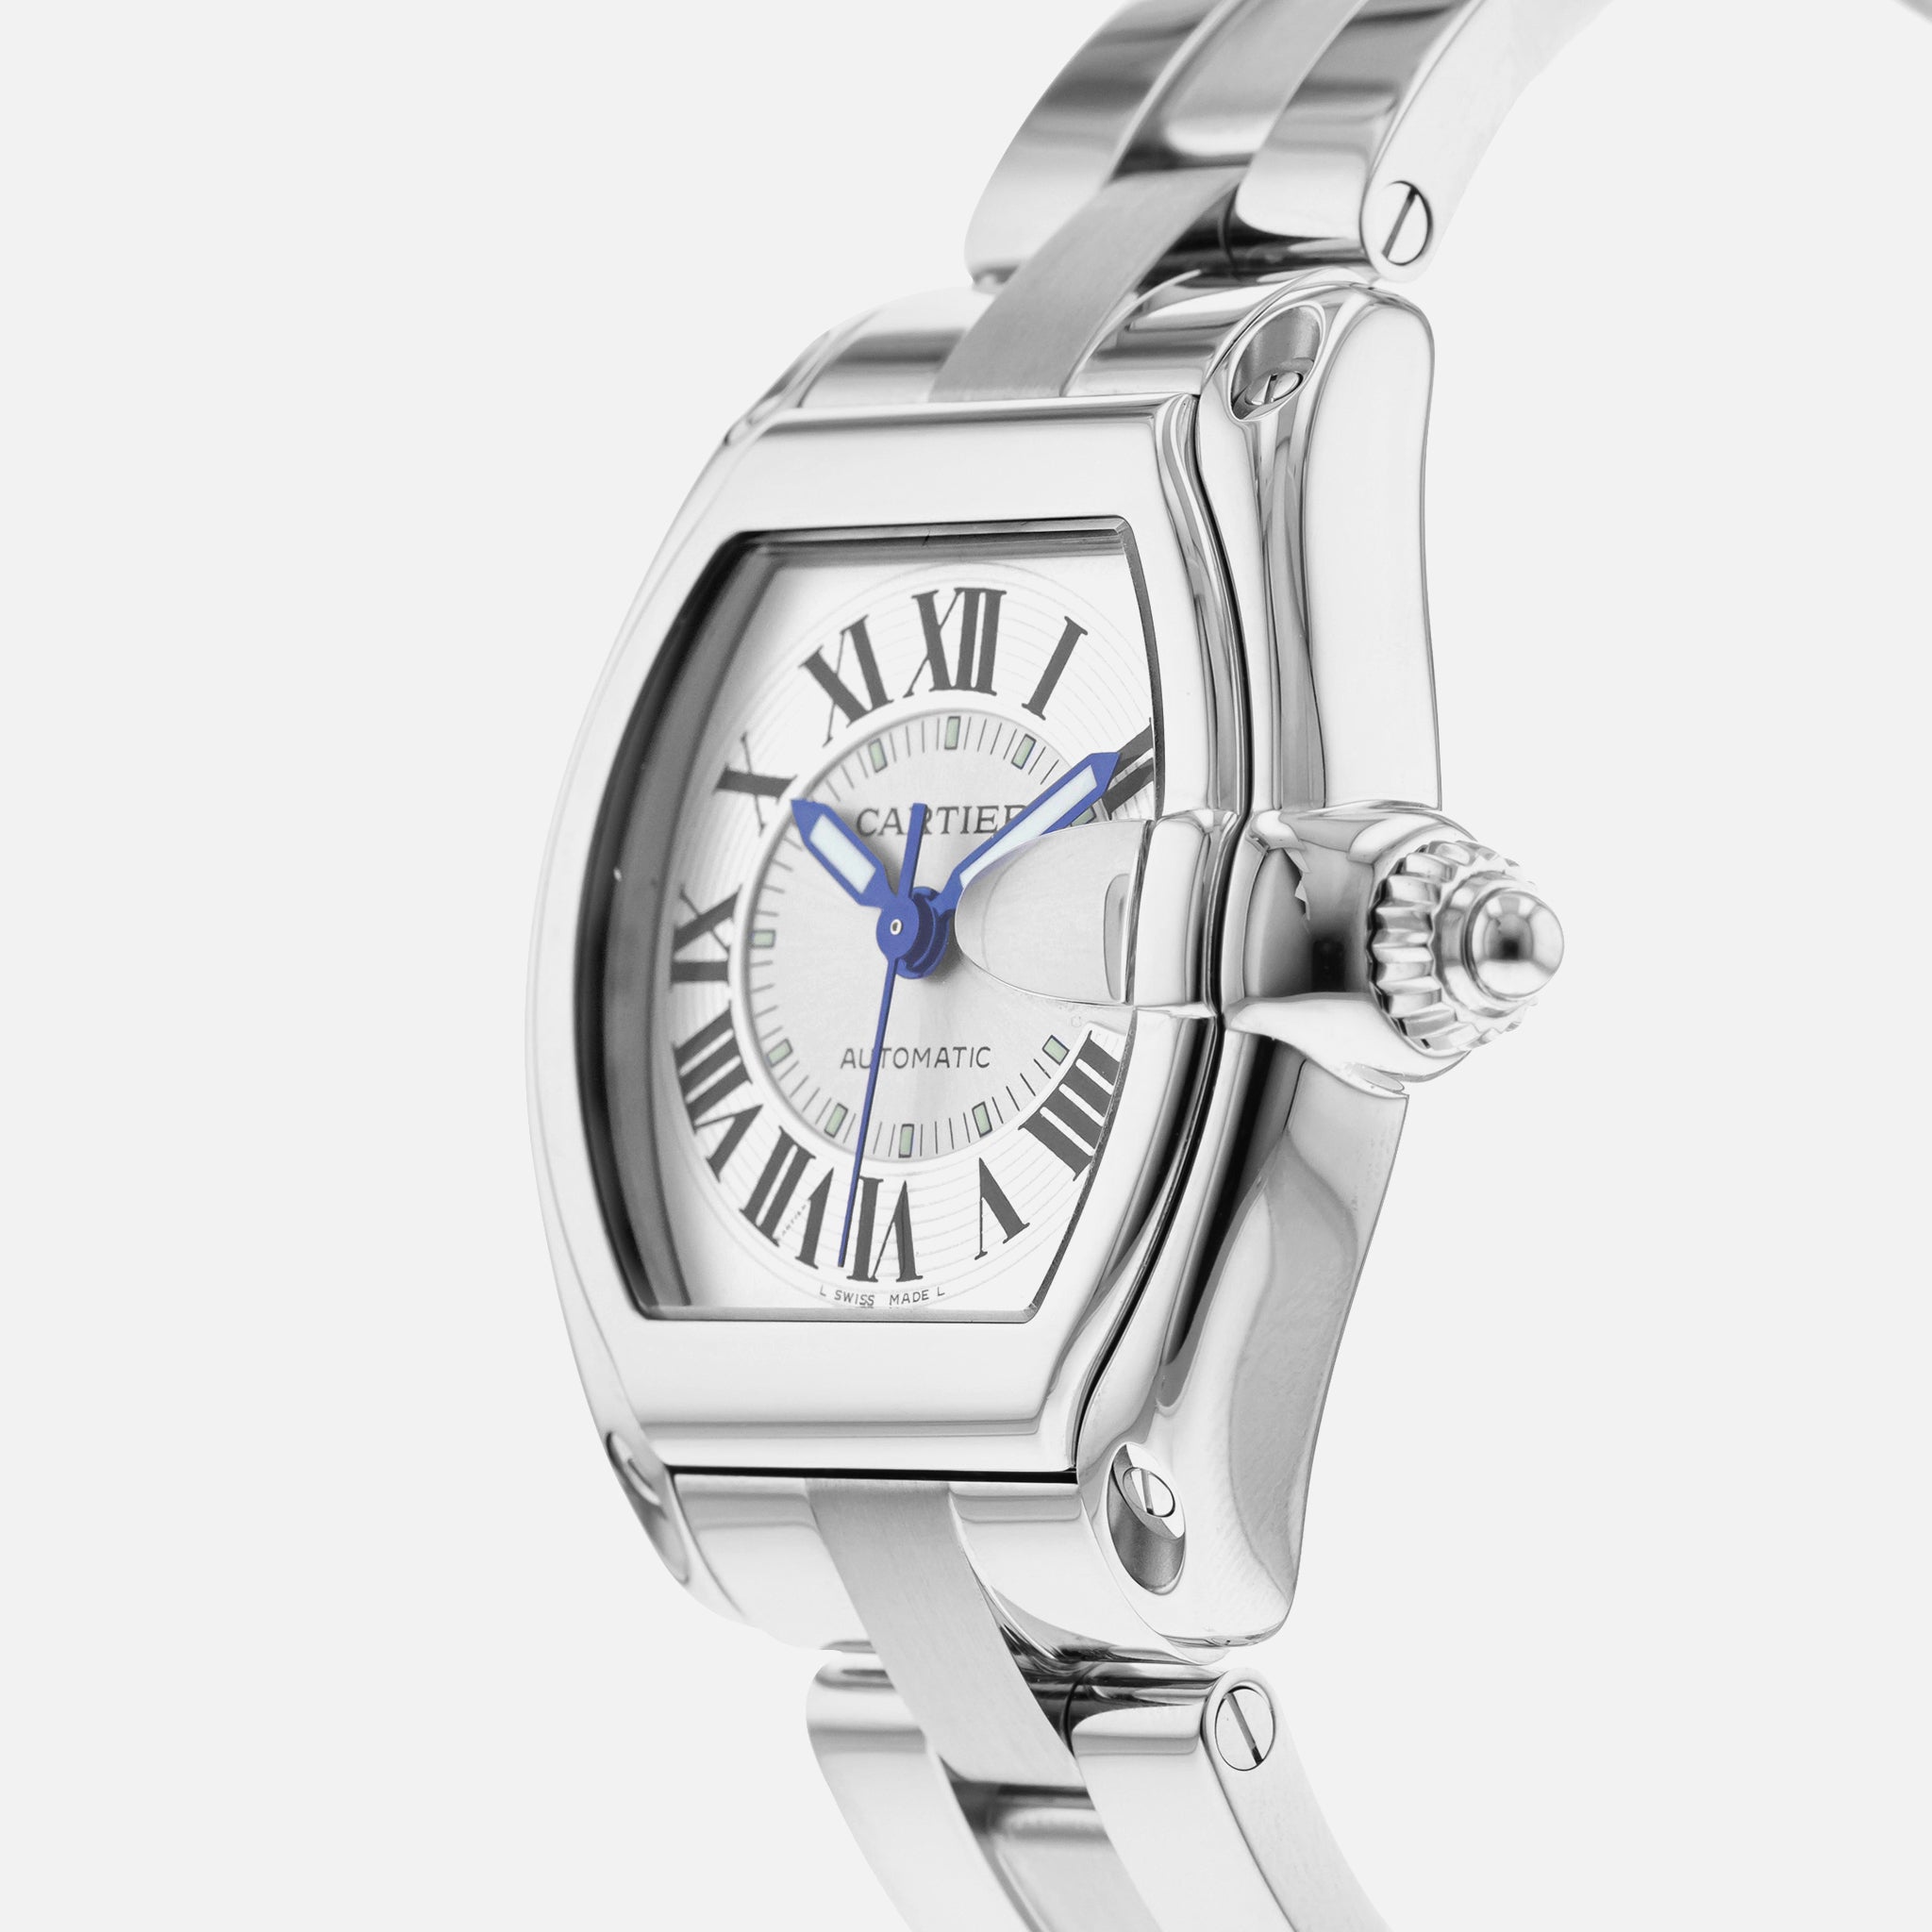 Cartier Roadster Automatic Ref 